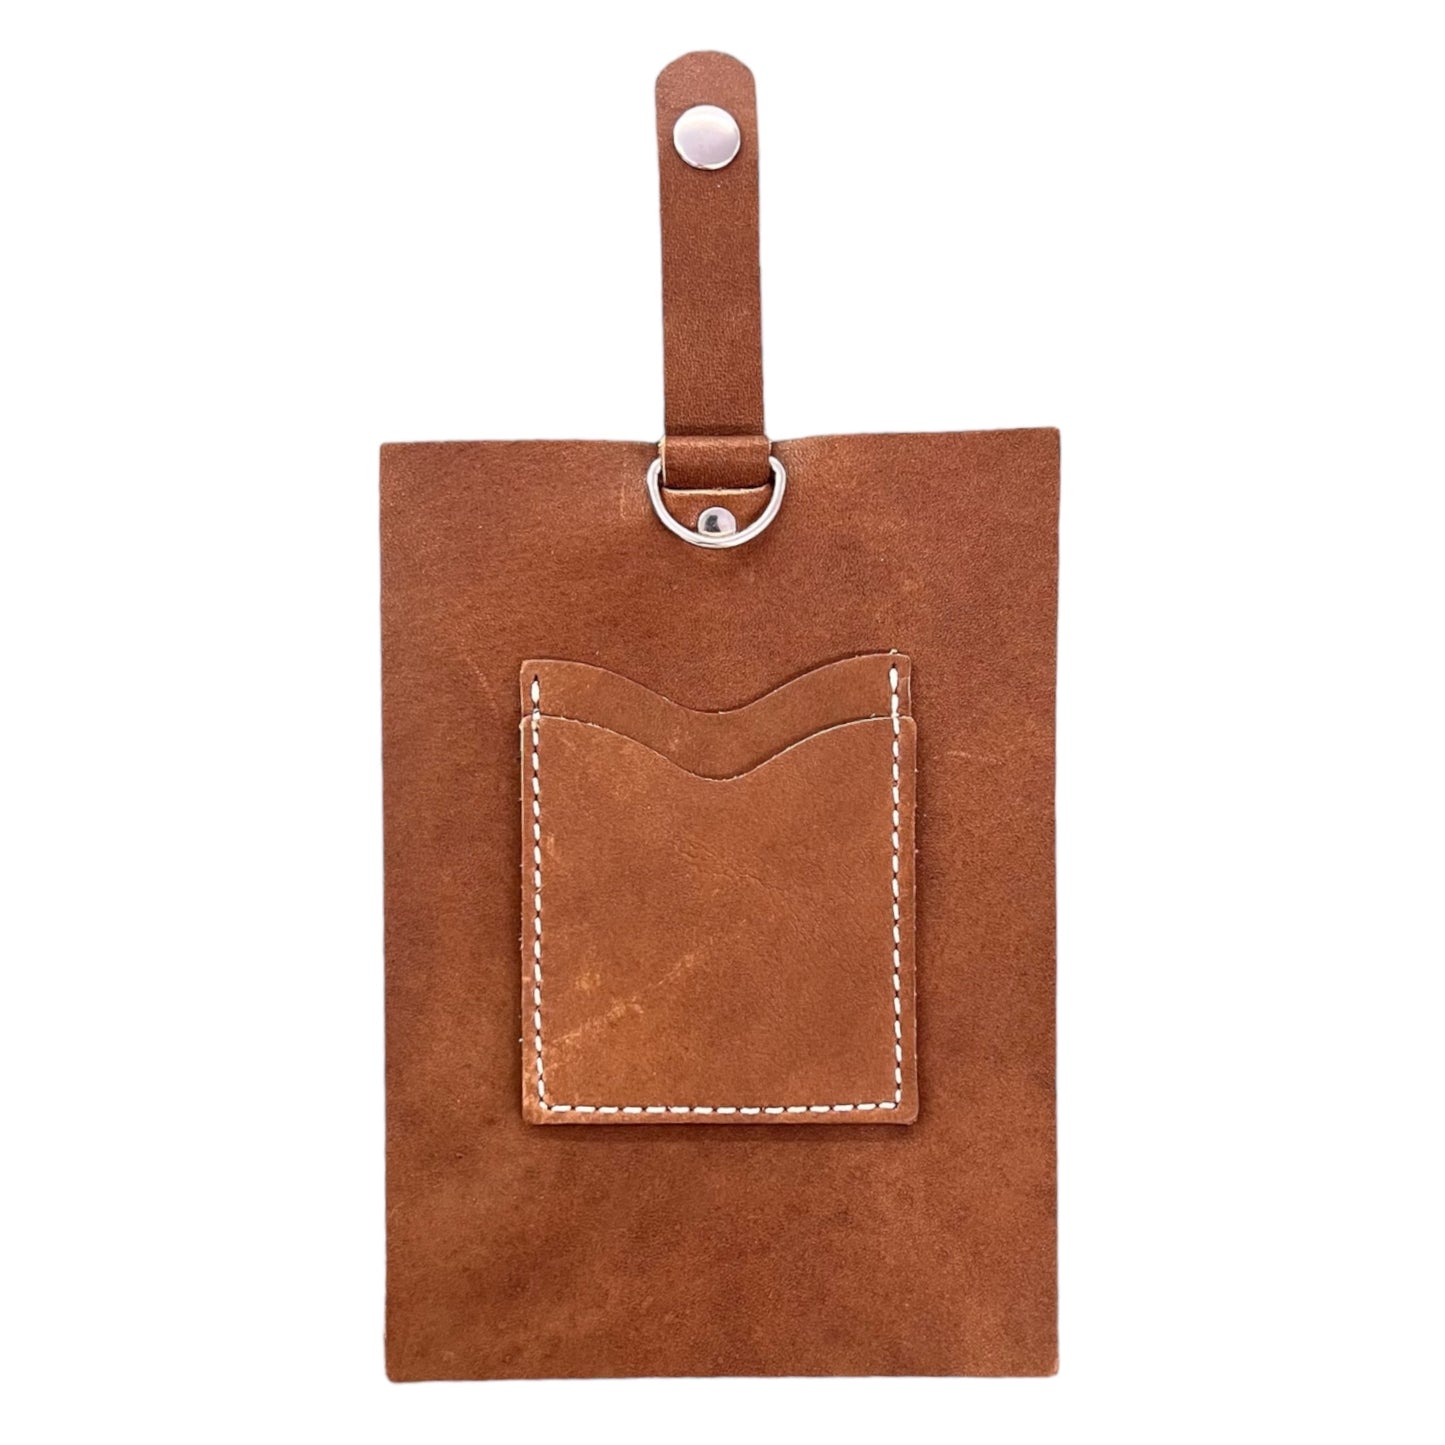 Brown DIY Leather Phone and Go Crossbody Purse Kit